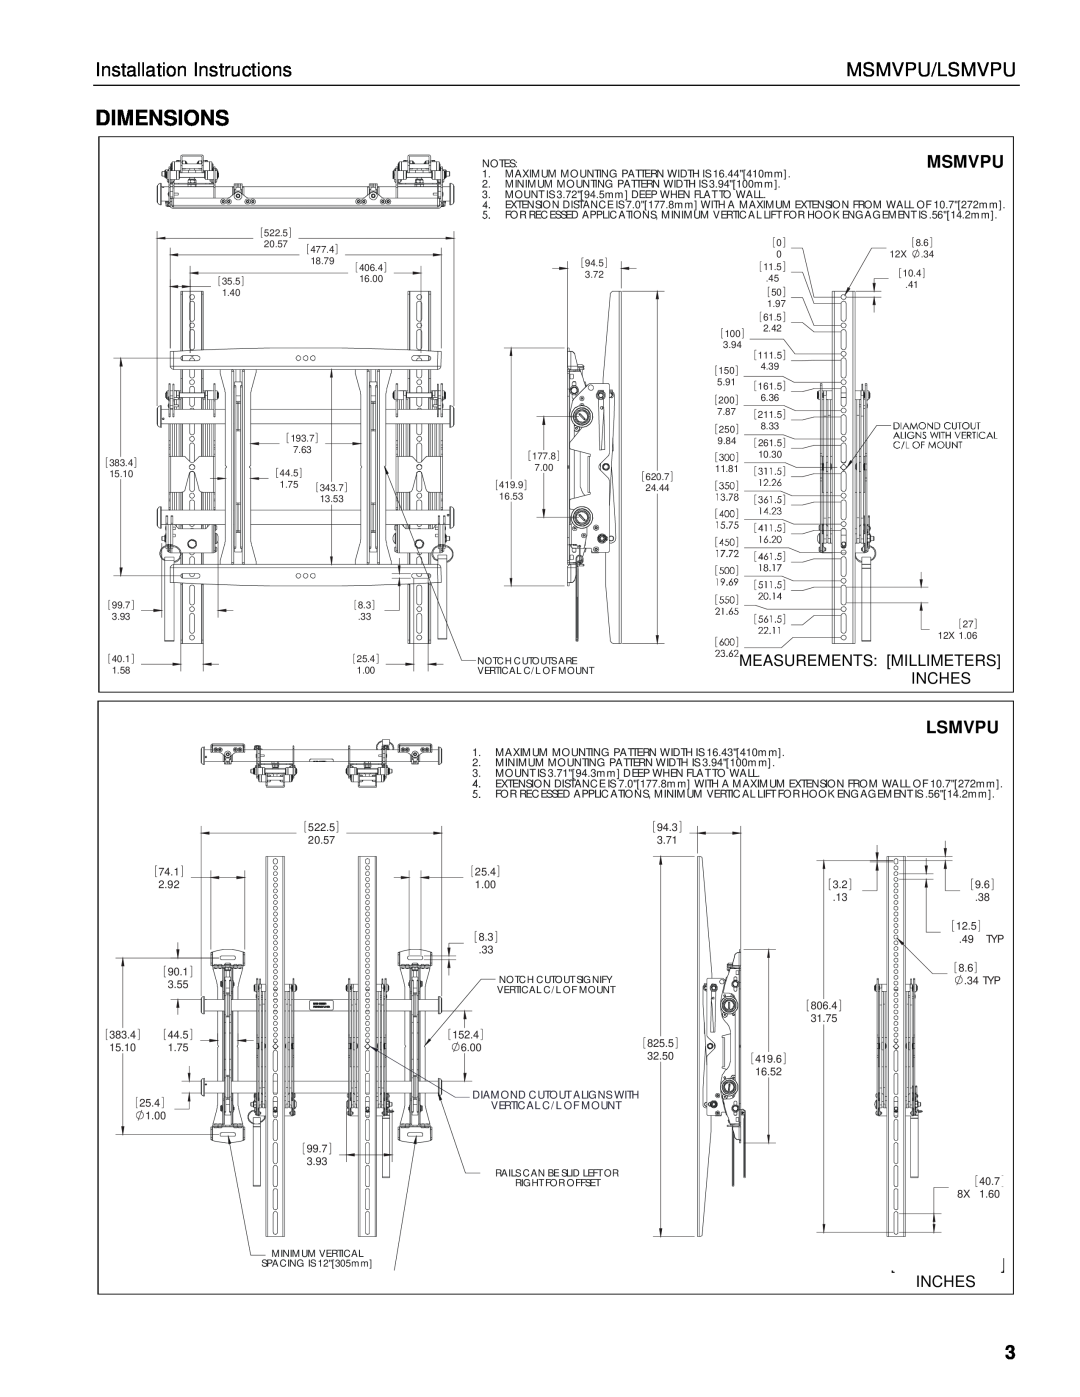 Chief Manufacturing LSMVPU Dimensions, Installation Instructions, Msmvpu/Lsmvpu, Measurements Millimeters, Inches 